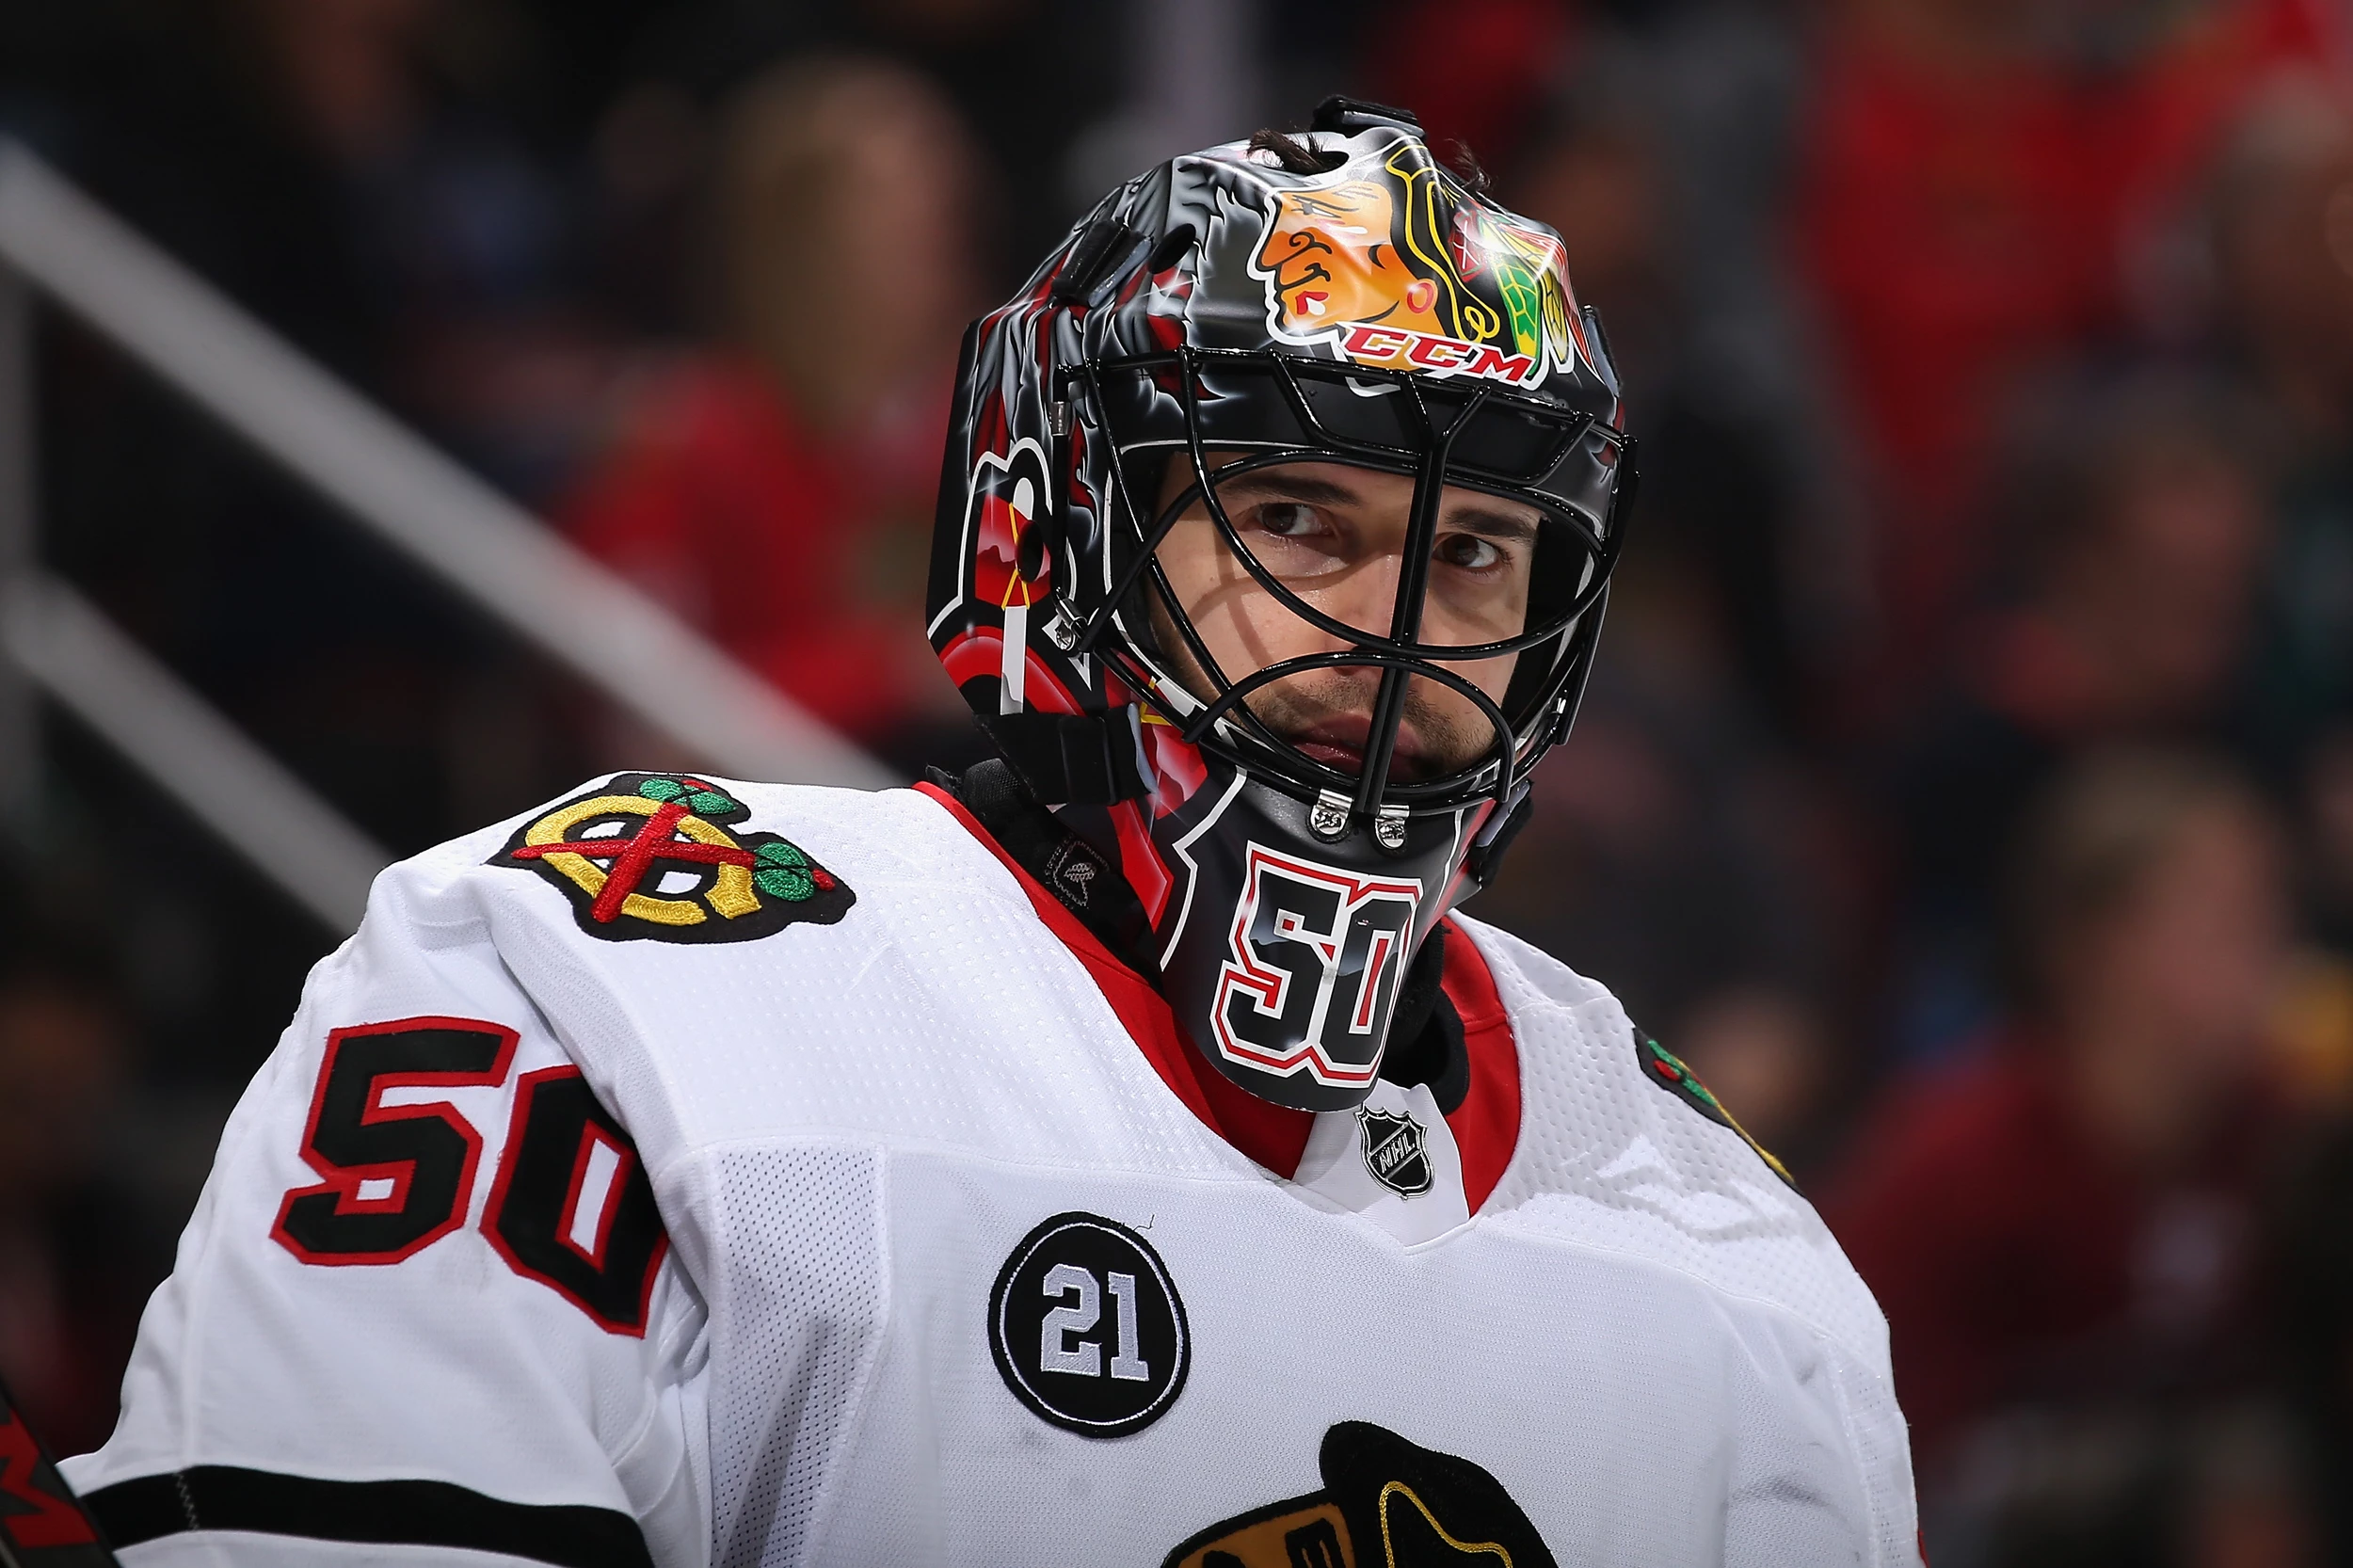 Corey Crawford's baby was rocking adorably small goalie pads at a